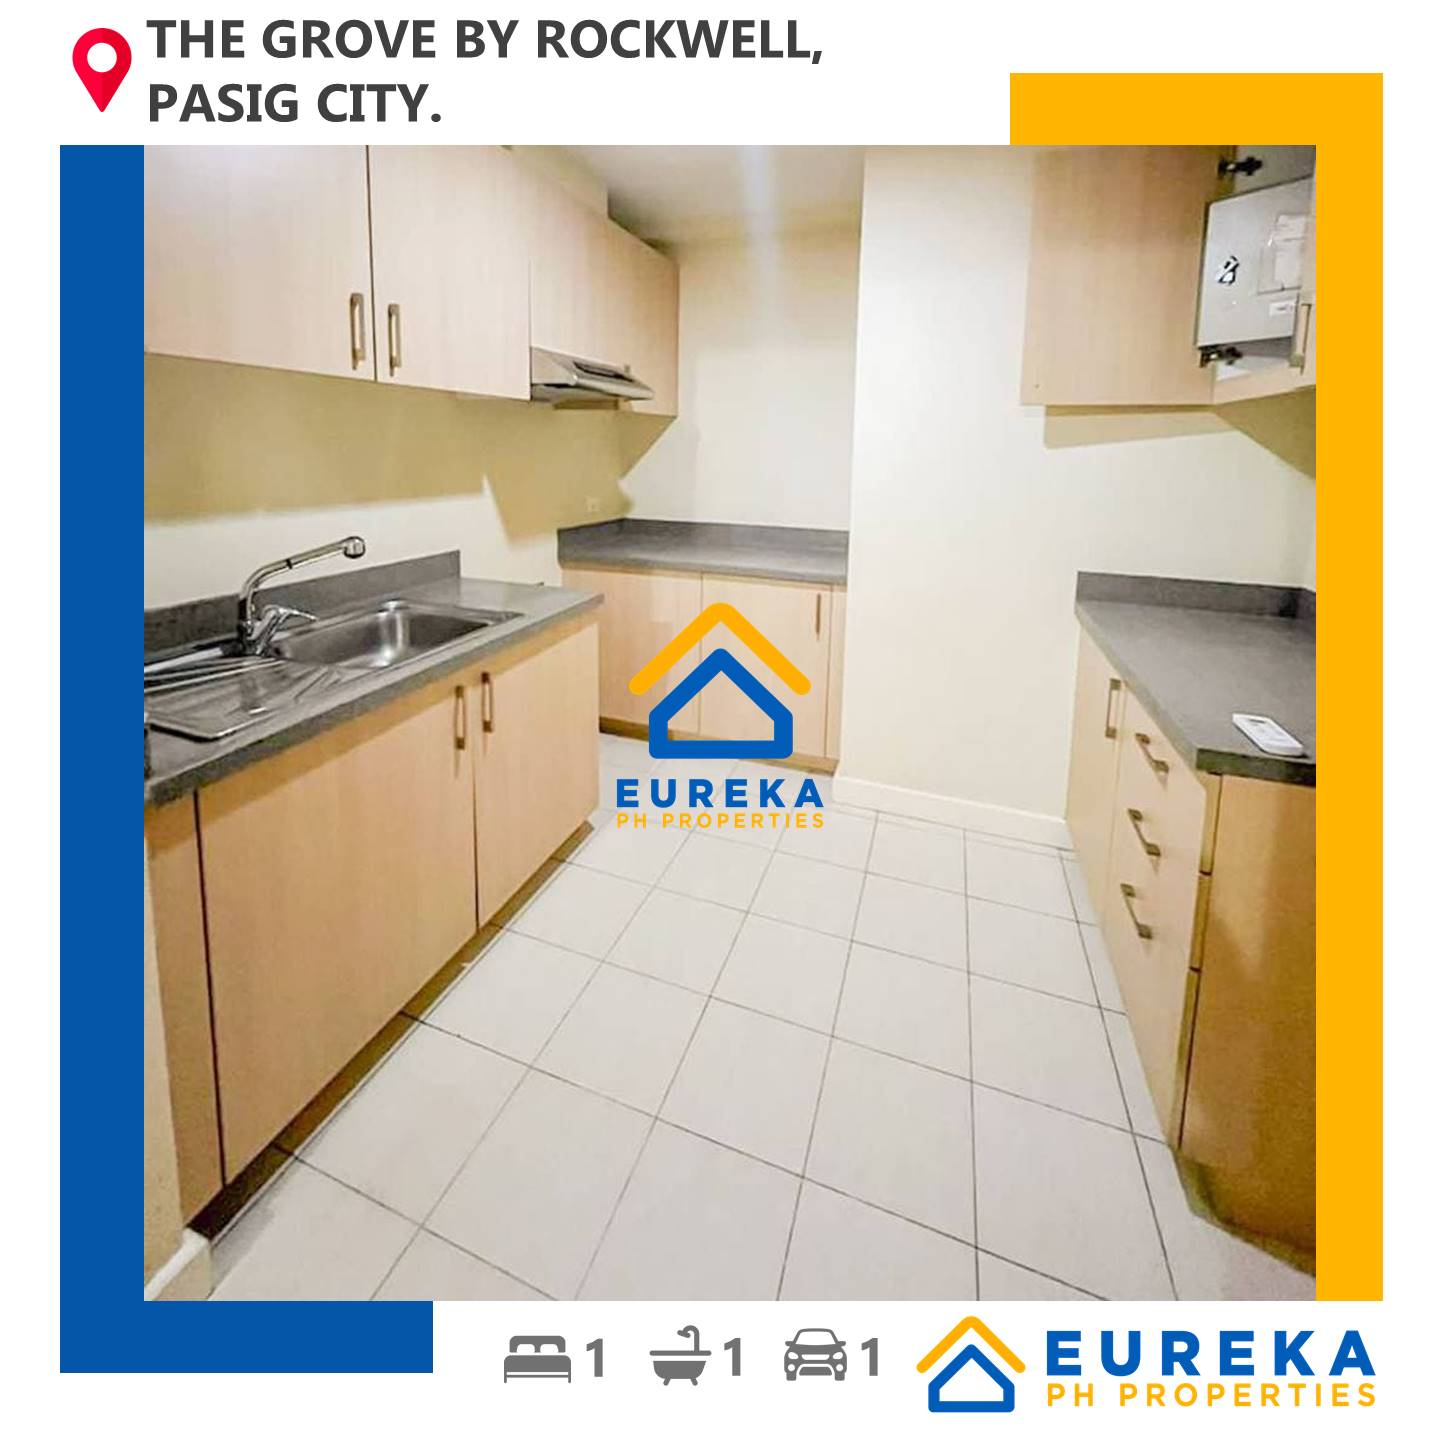 Fresh 1BR 65 sqm unit w/ parking slot at Grove by Rockwell Pasig